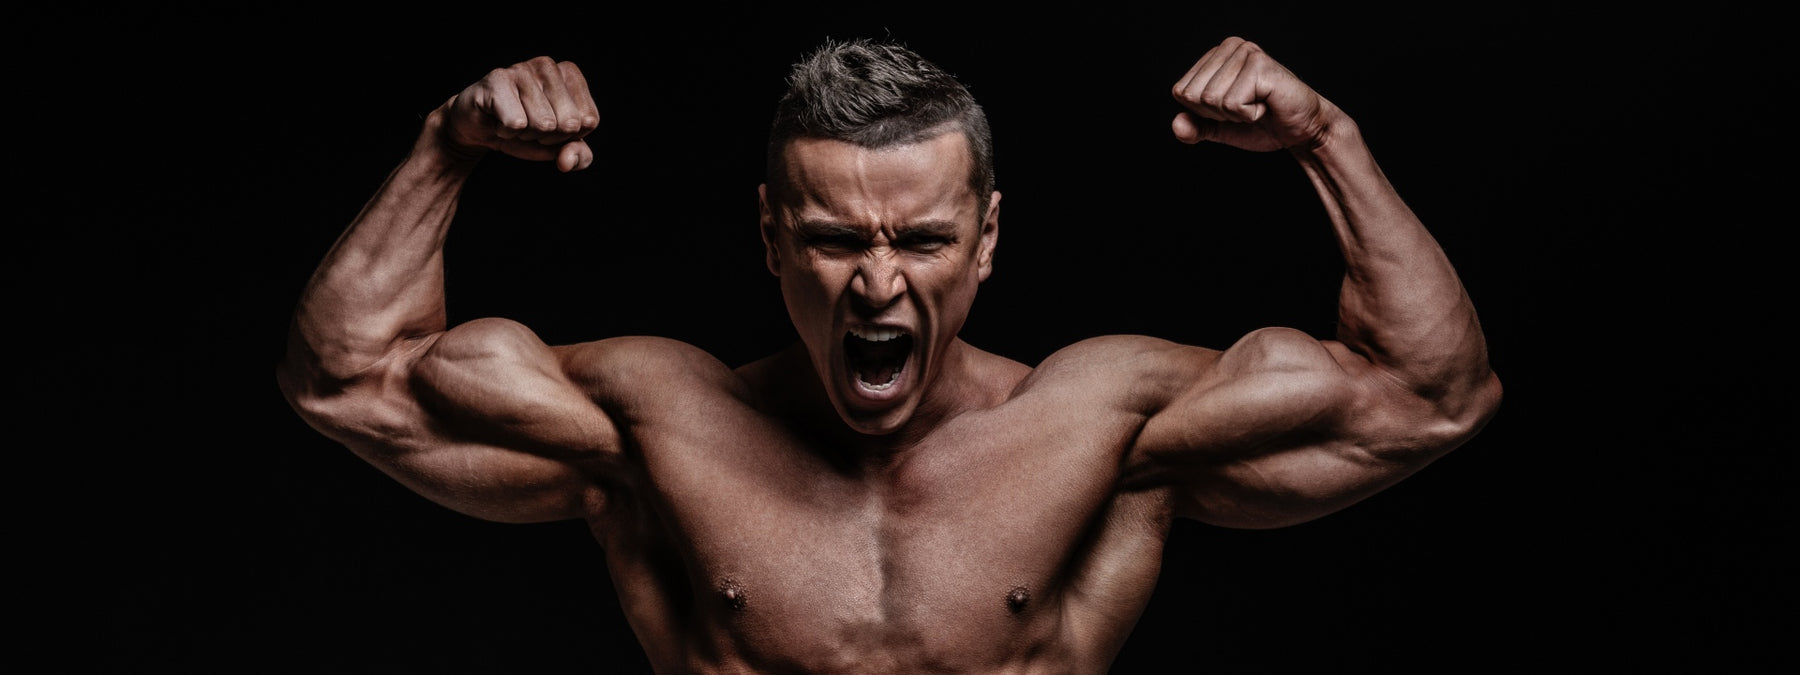 The Best Way to Build Muscle Fast in 2016 (And Strength Too)